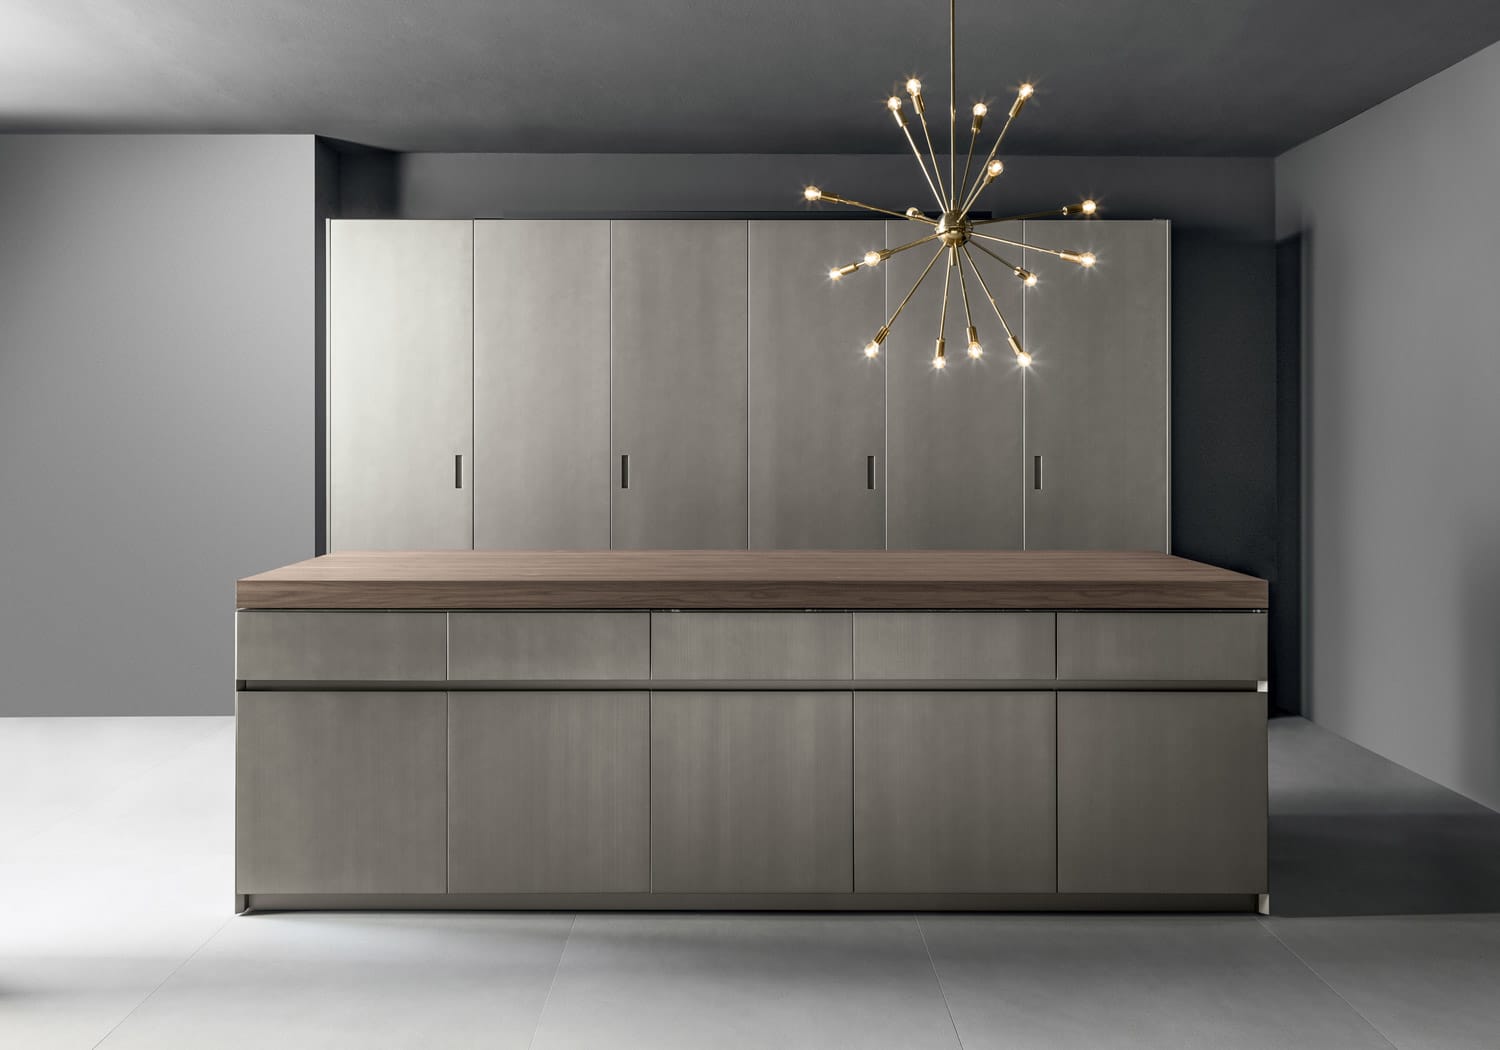 This custom-made kitchen is a study in minimalism with its combination of satin finished Aged Graphite lacquer and shaved Canaletto Walnut. On both the wall and the island, all functional areas are concealed when not in use. 